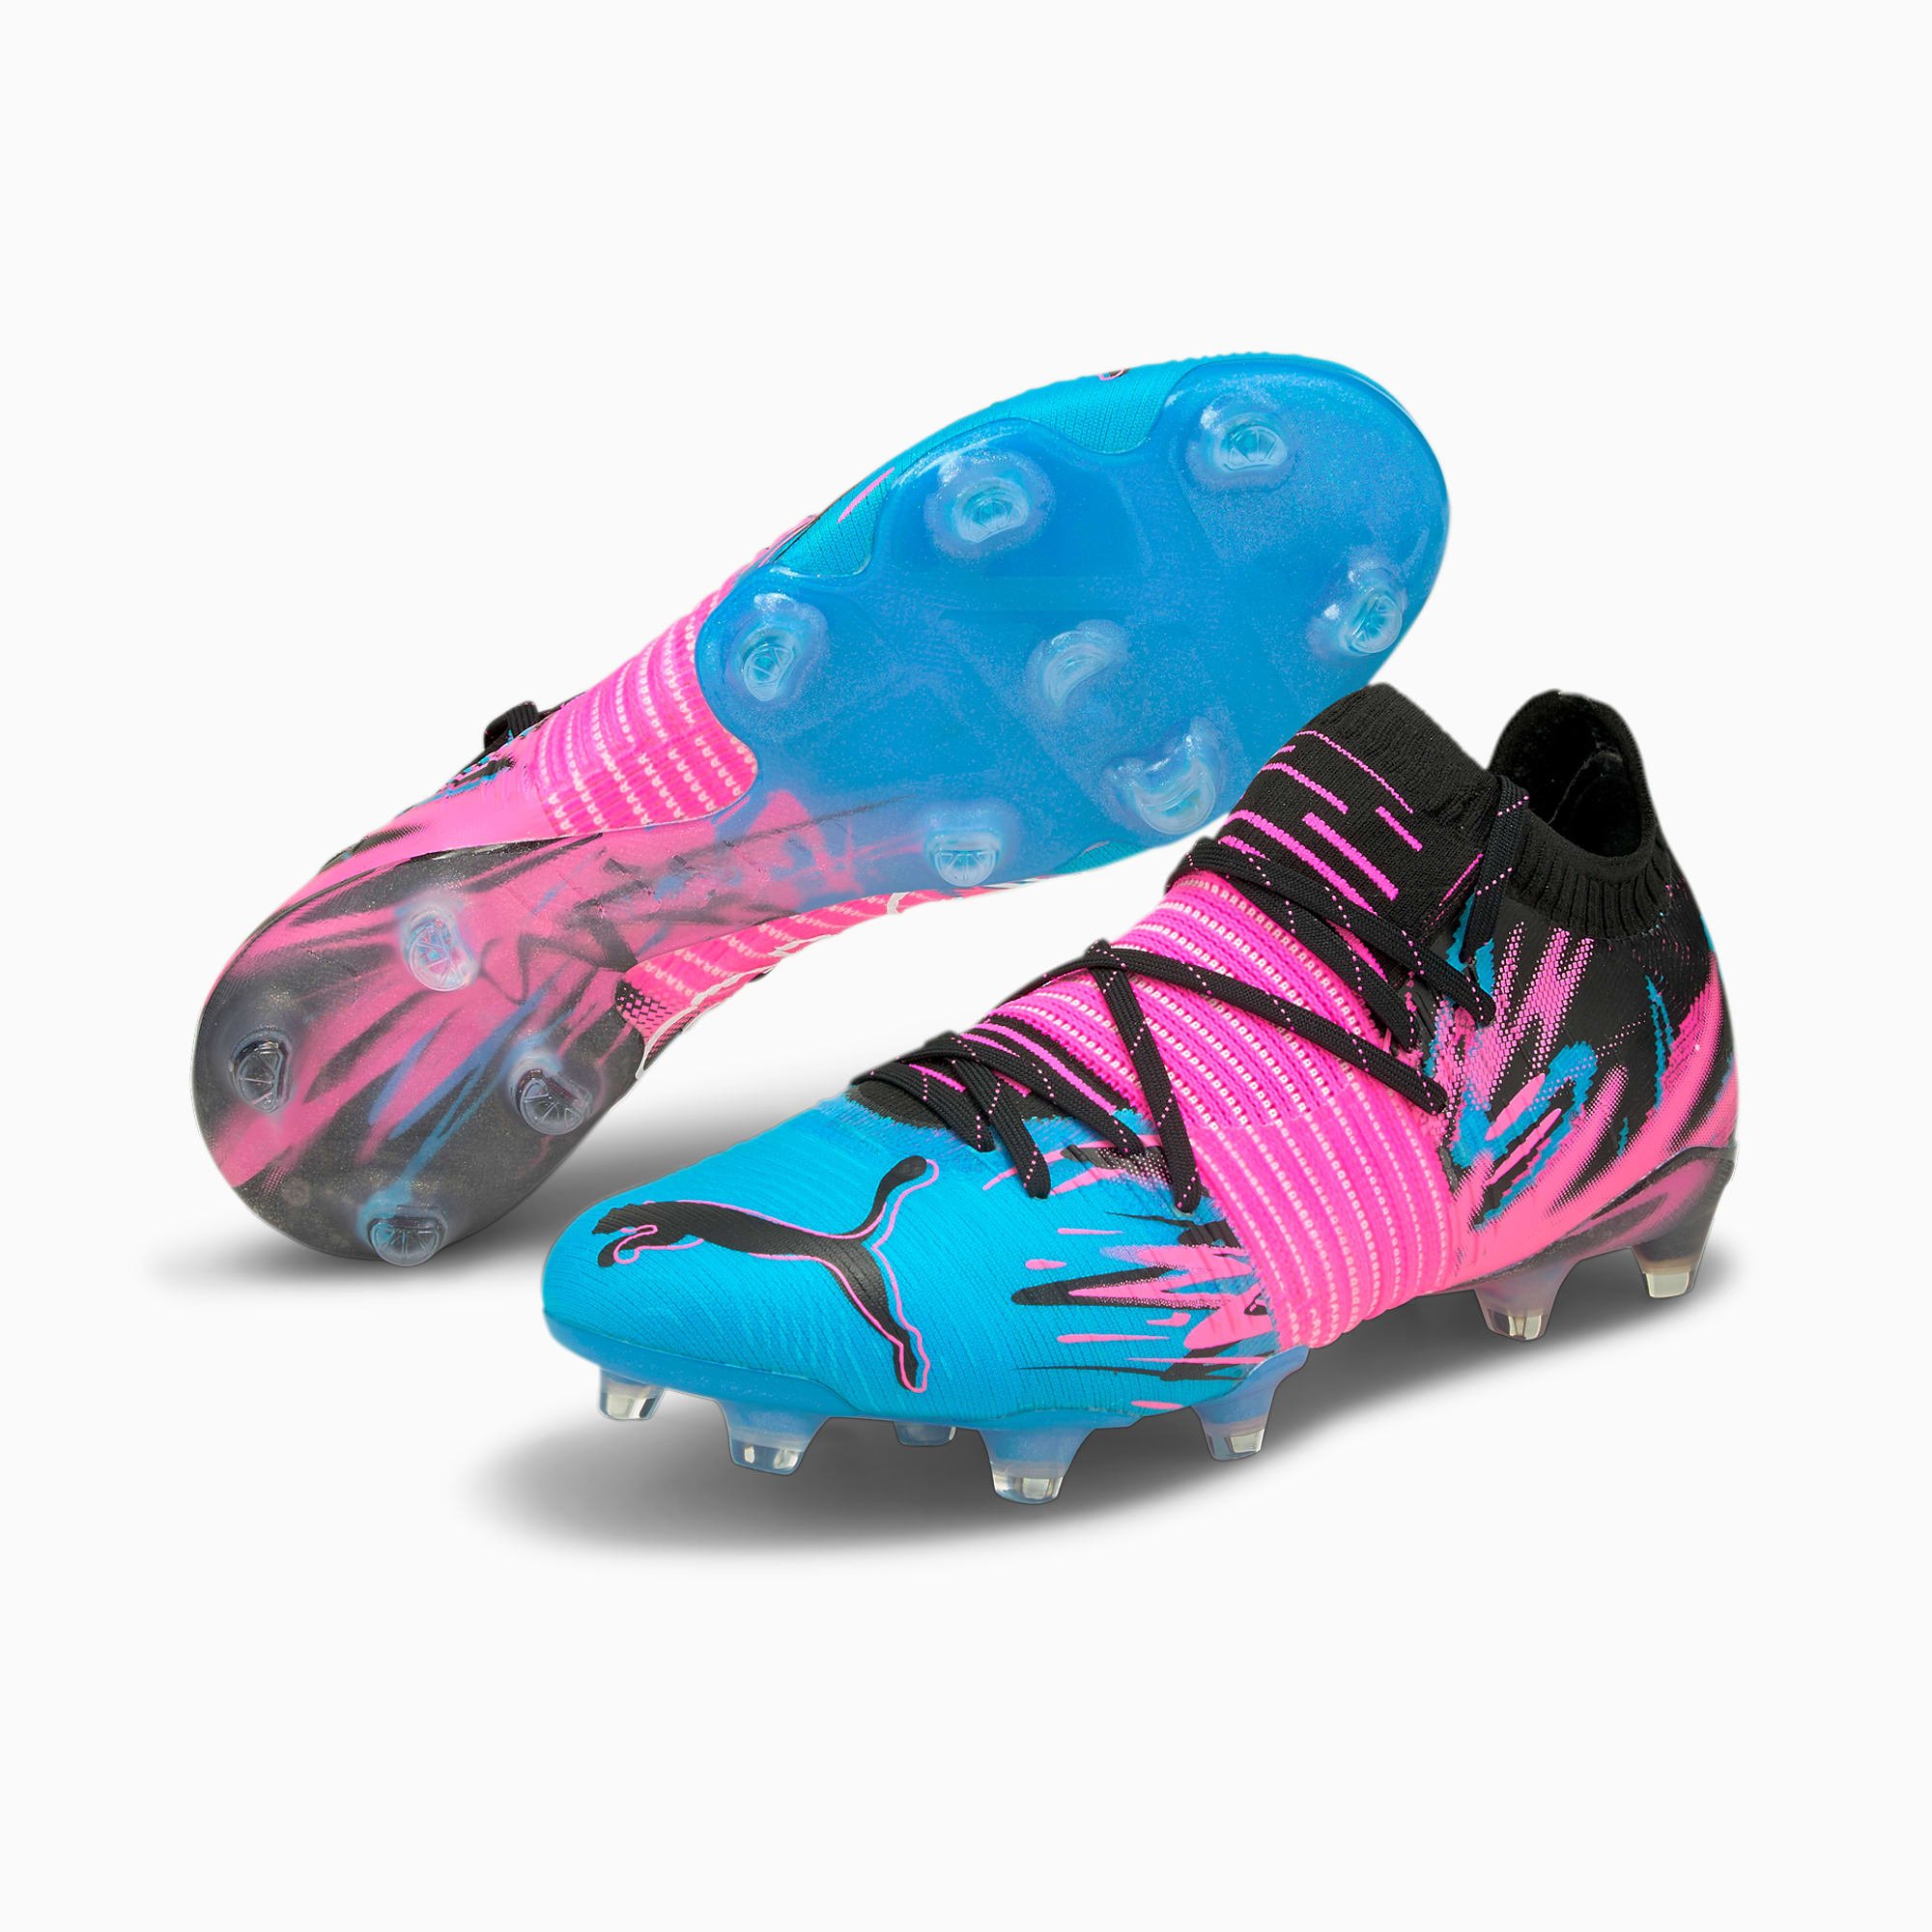 blue and pink football boots